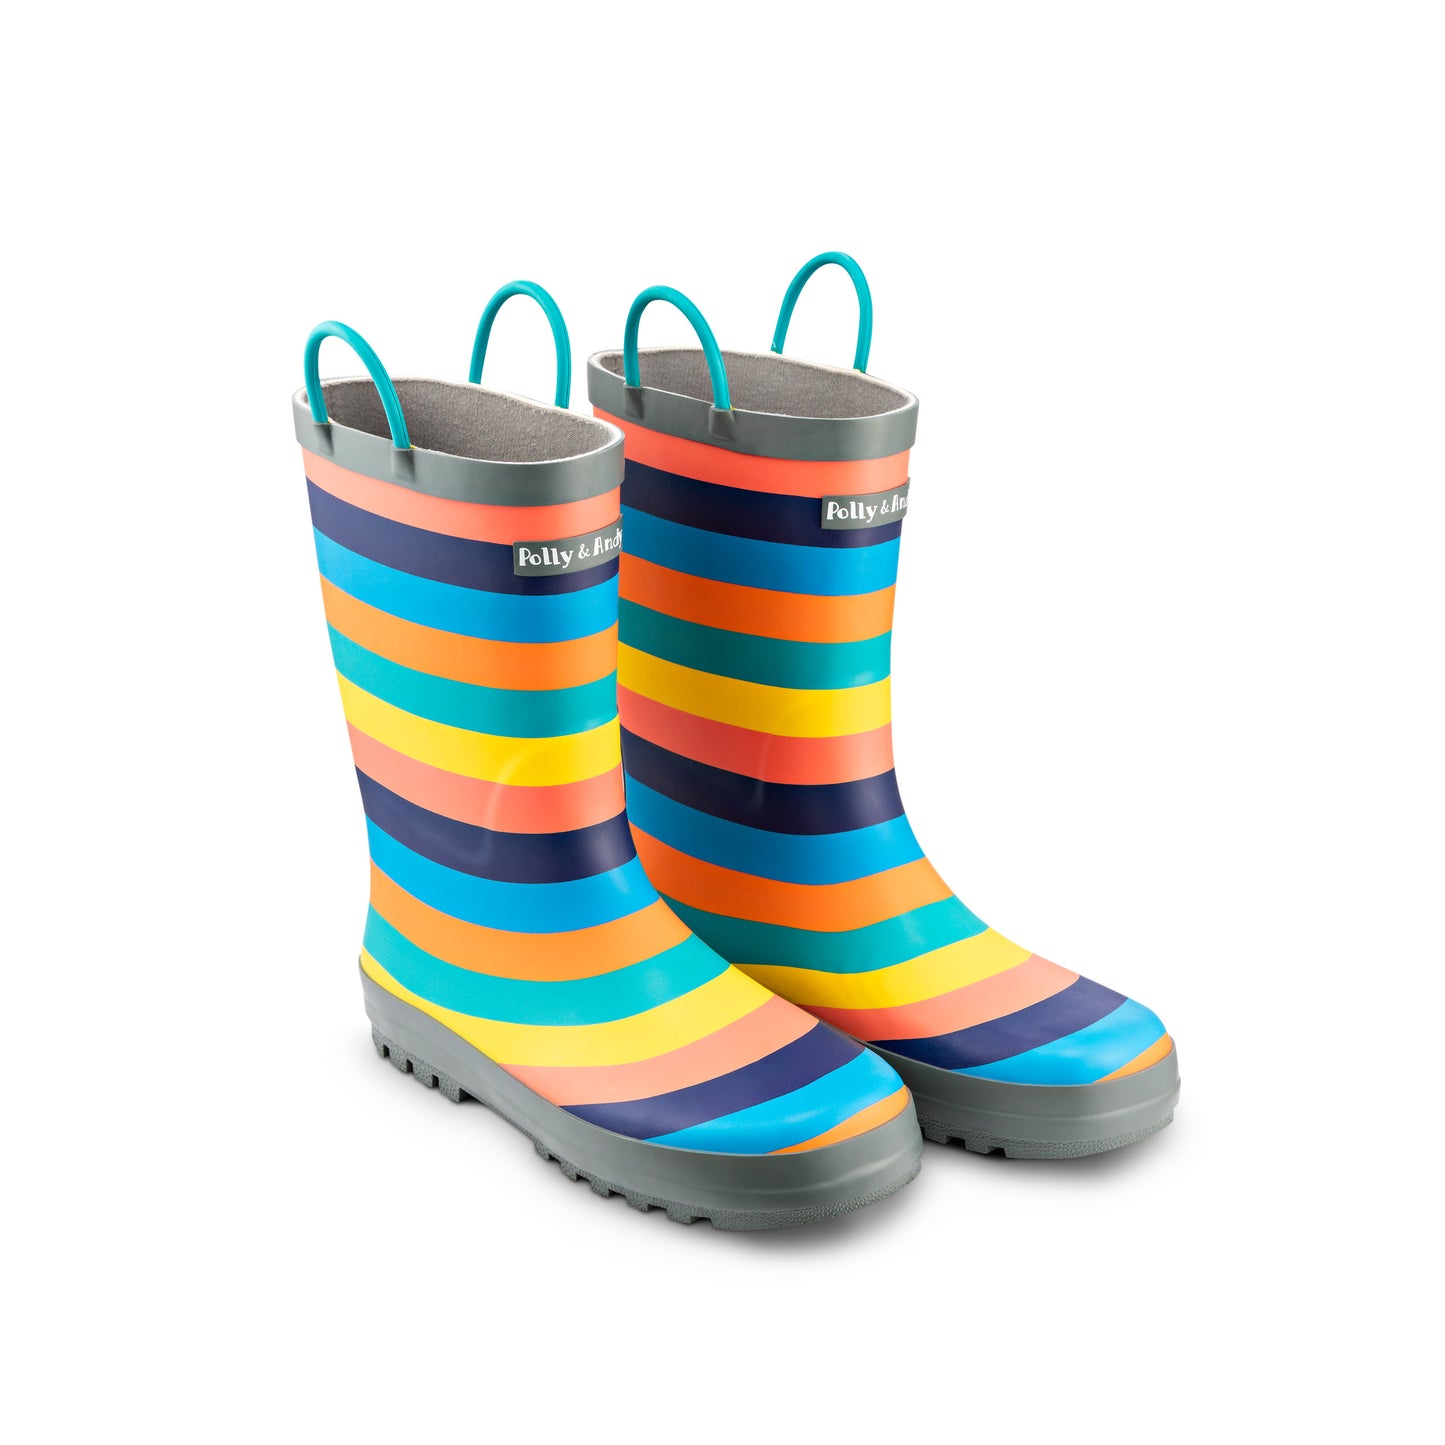 Order now to get your Sustainable Rainboots for dispatch on April 15th! Including FREE shipping AND a free pair of rainbow knee high bamboo socks too!